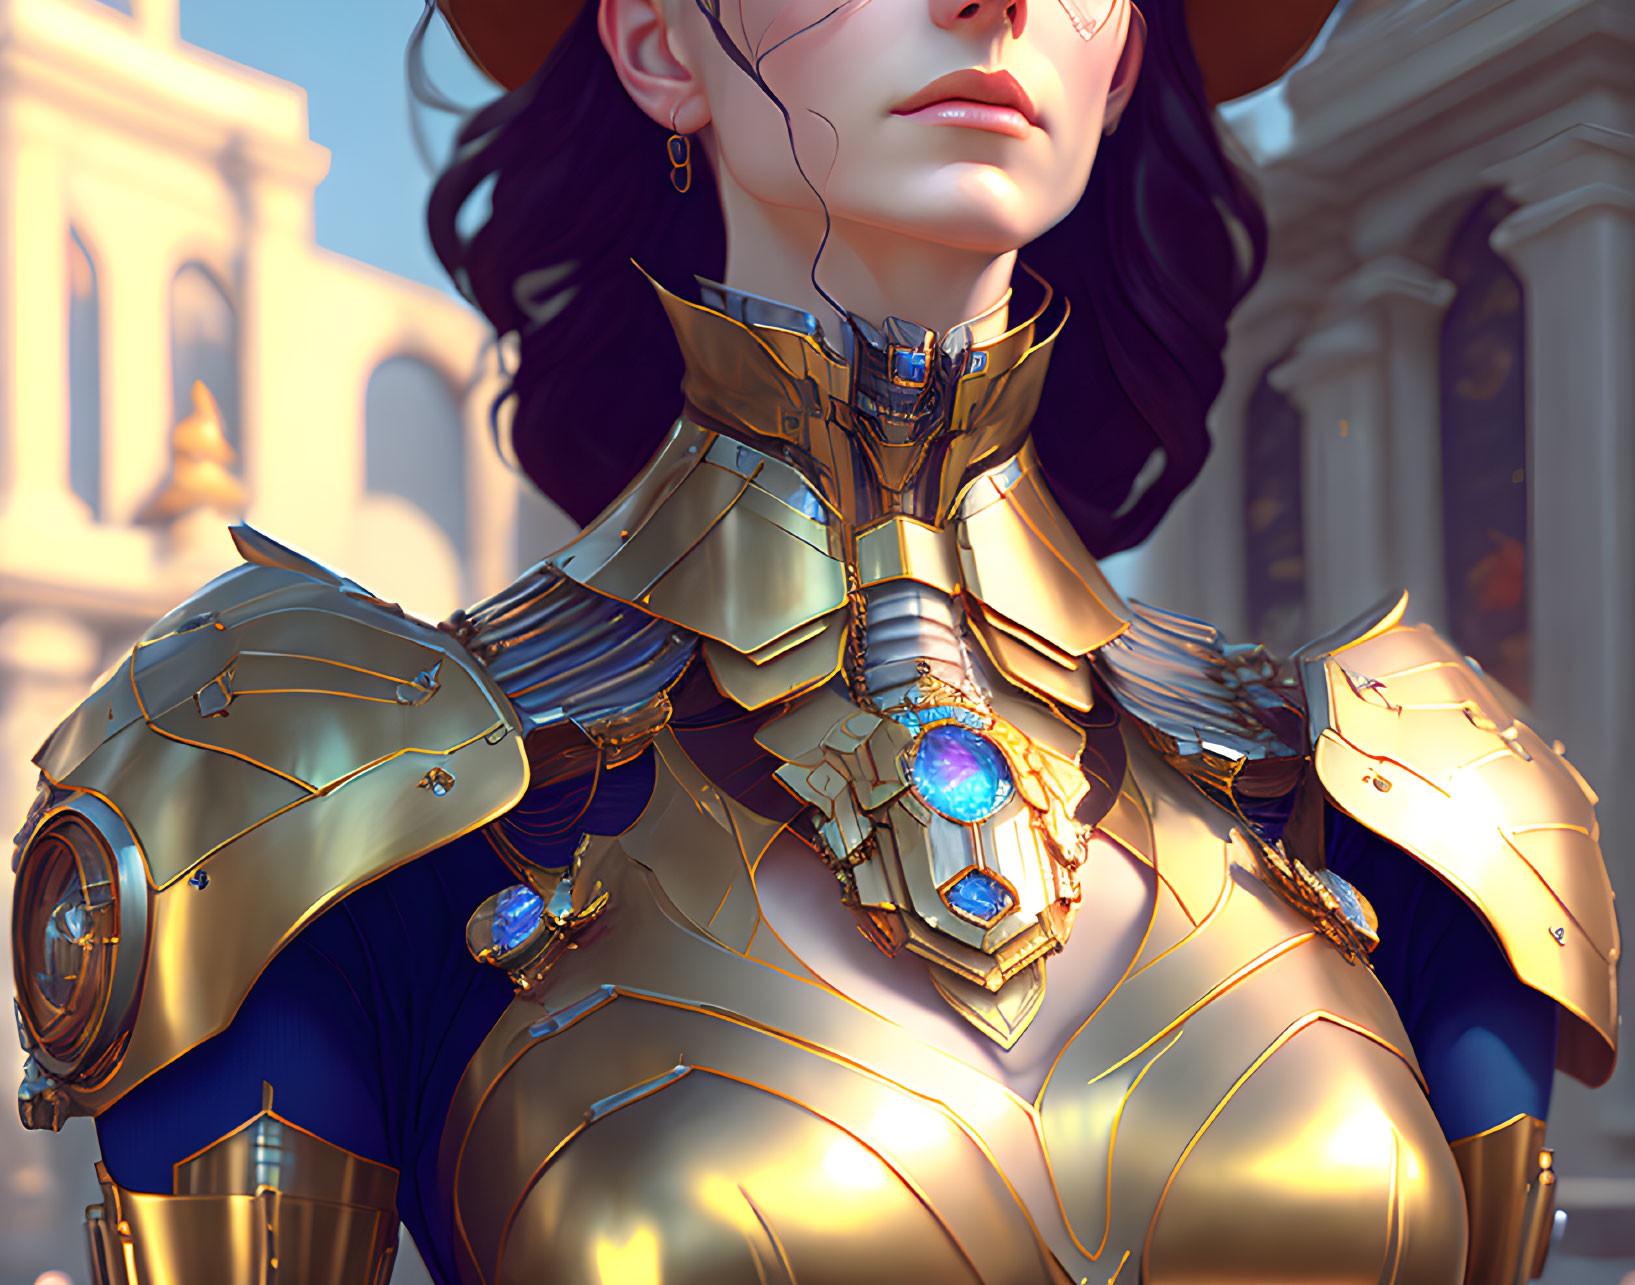 Illustration: Woman in Golden Armor with Blue Gem Accents in Classical Architecture Setting